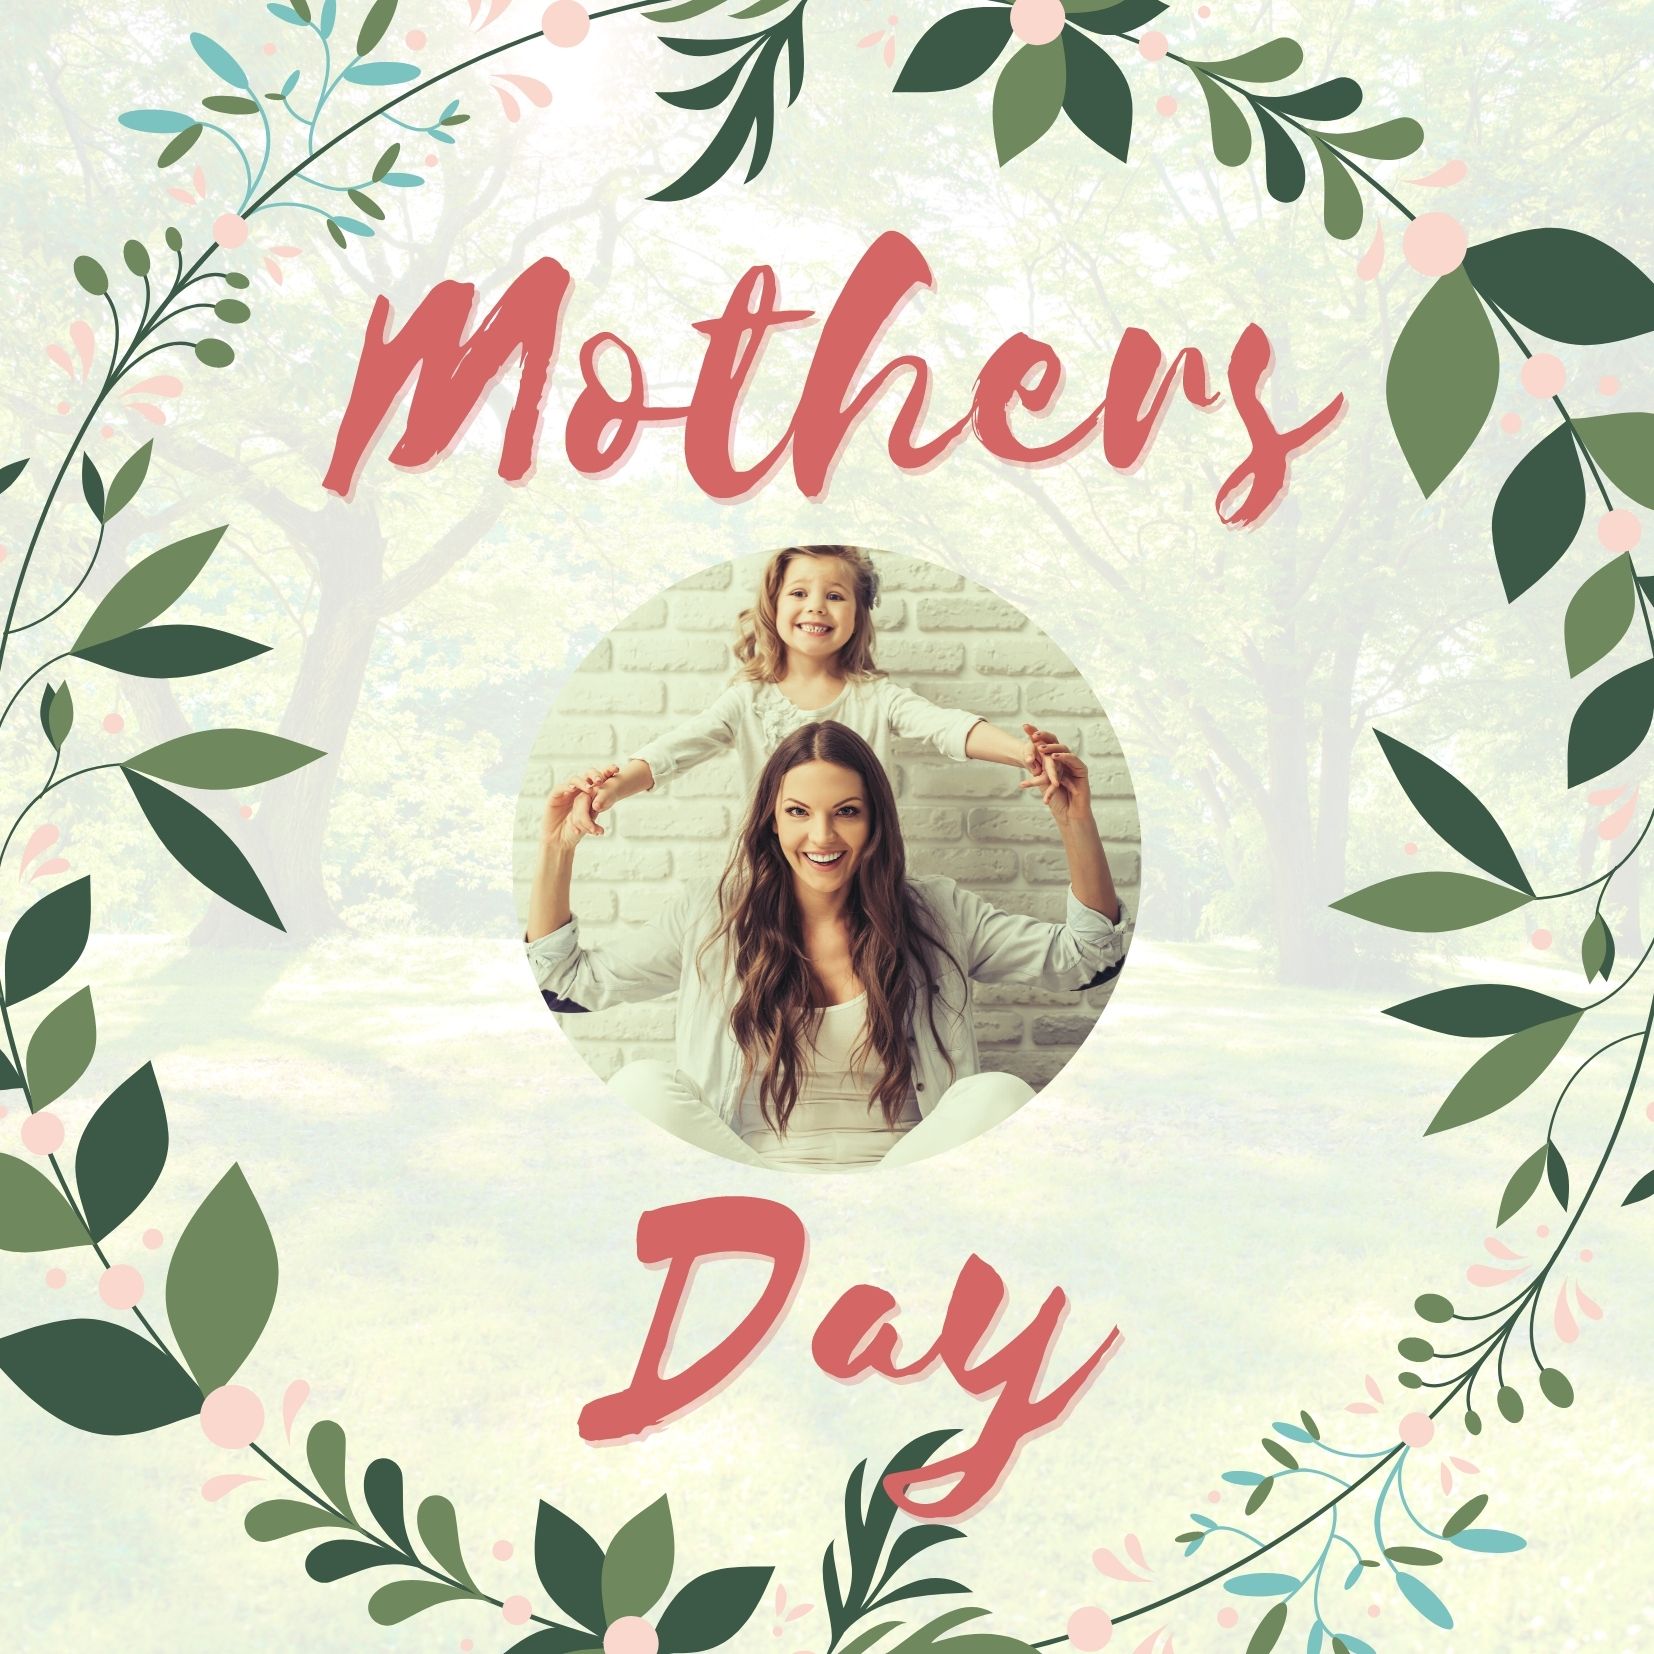 Mothers Day Is Almost Here!